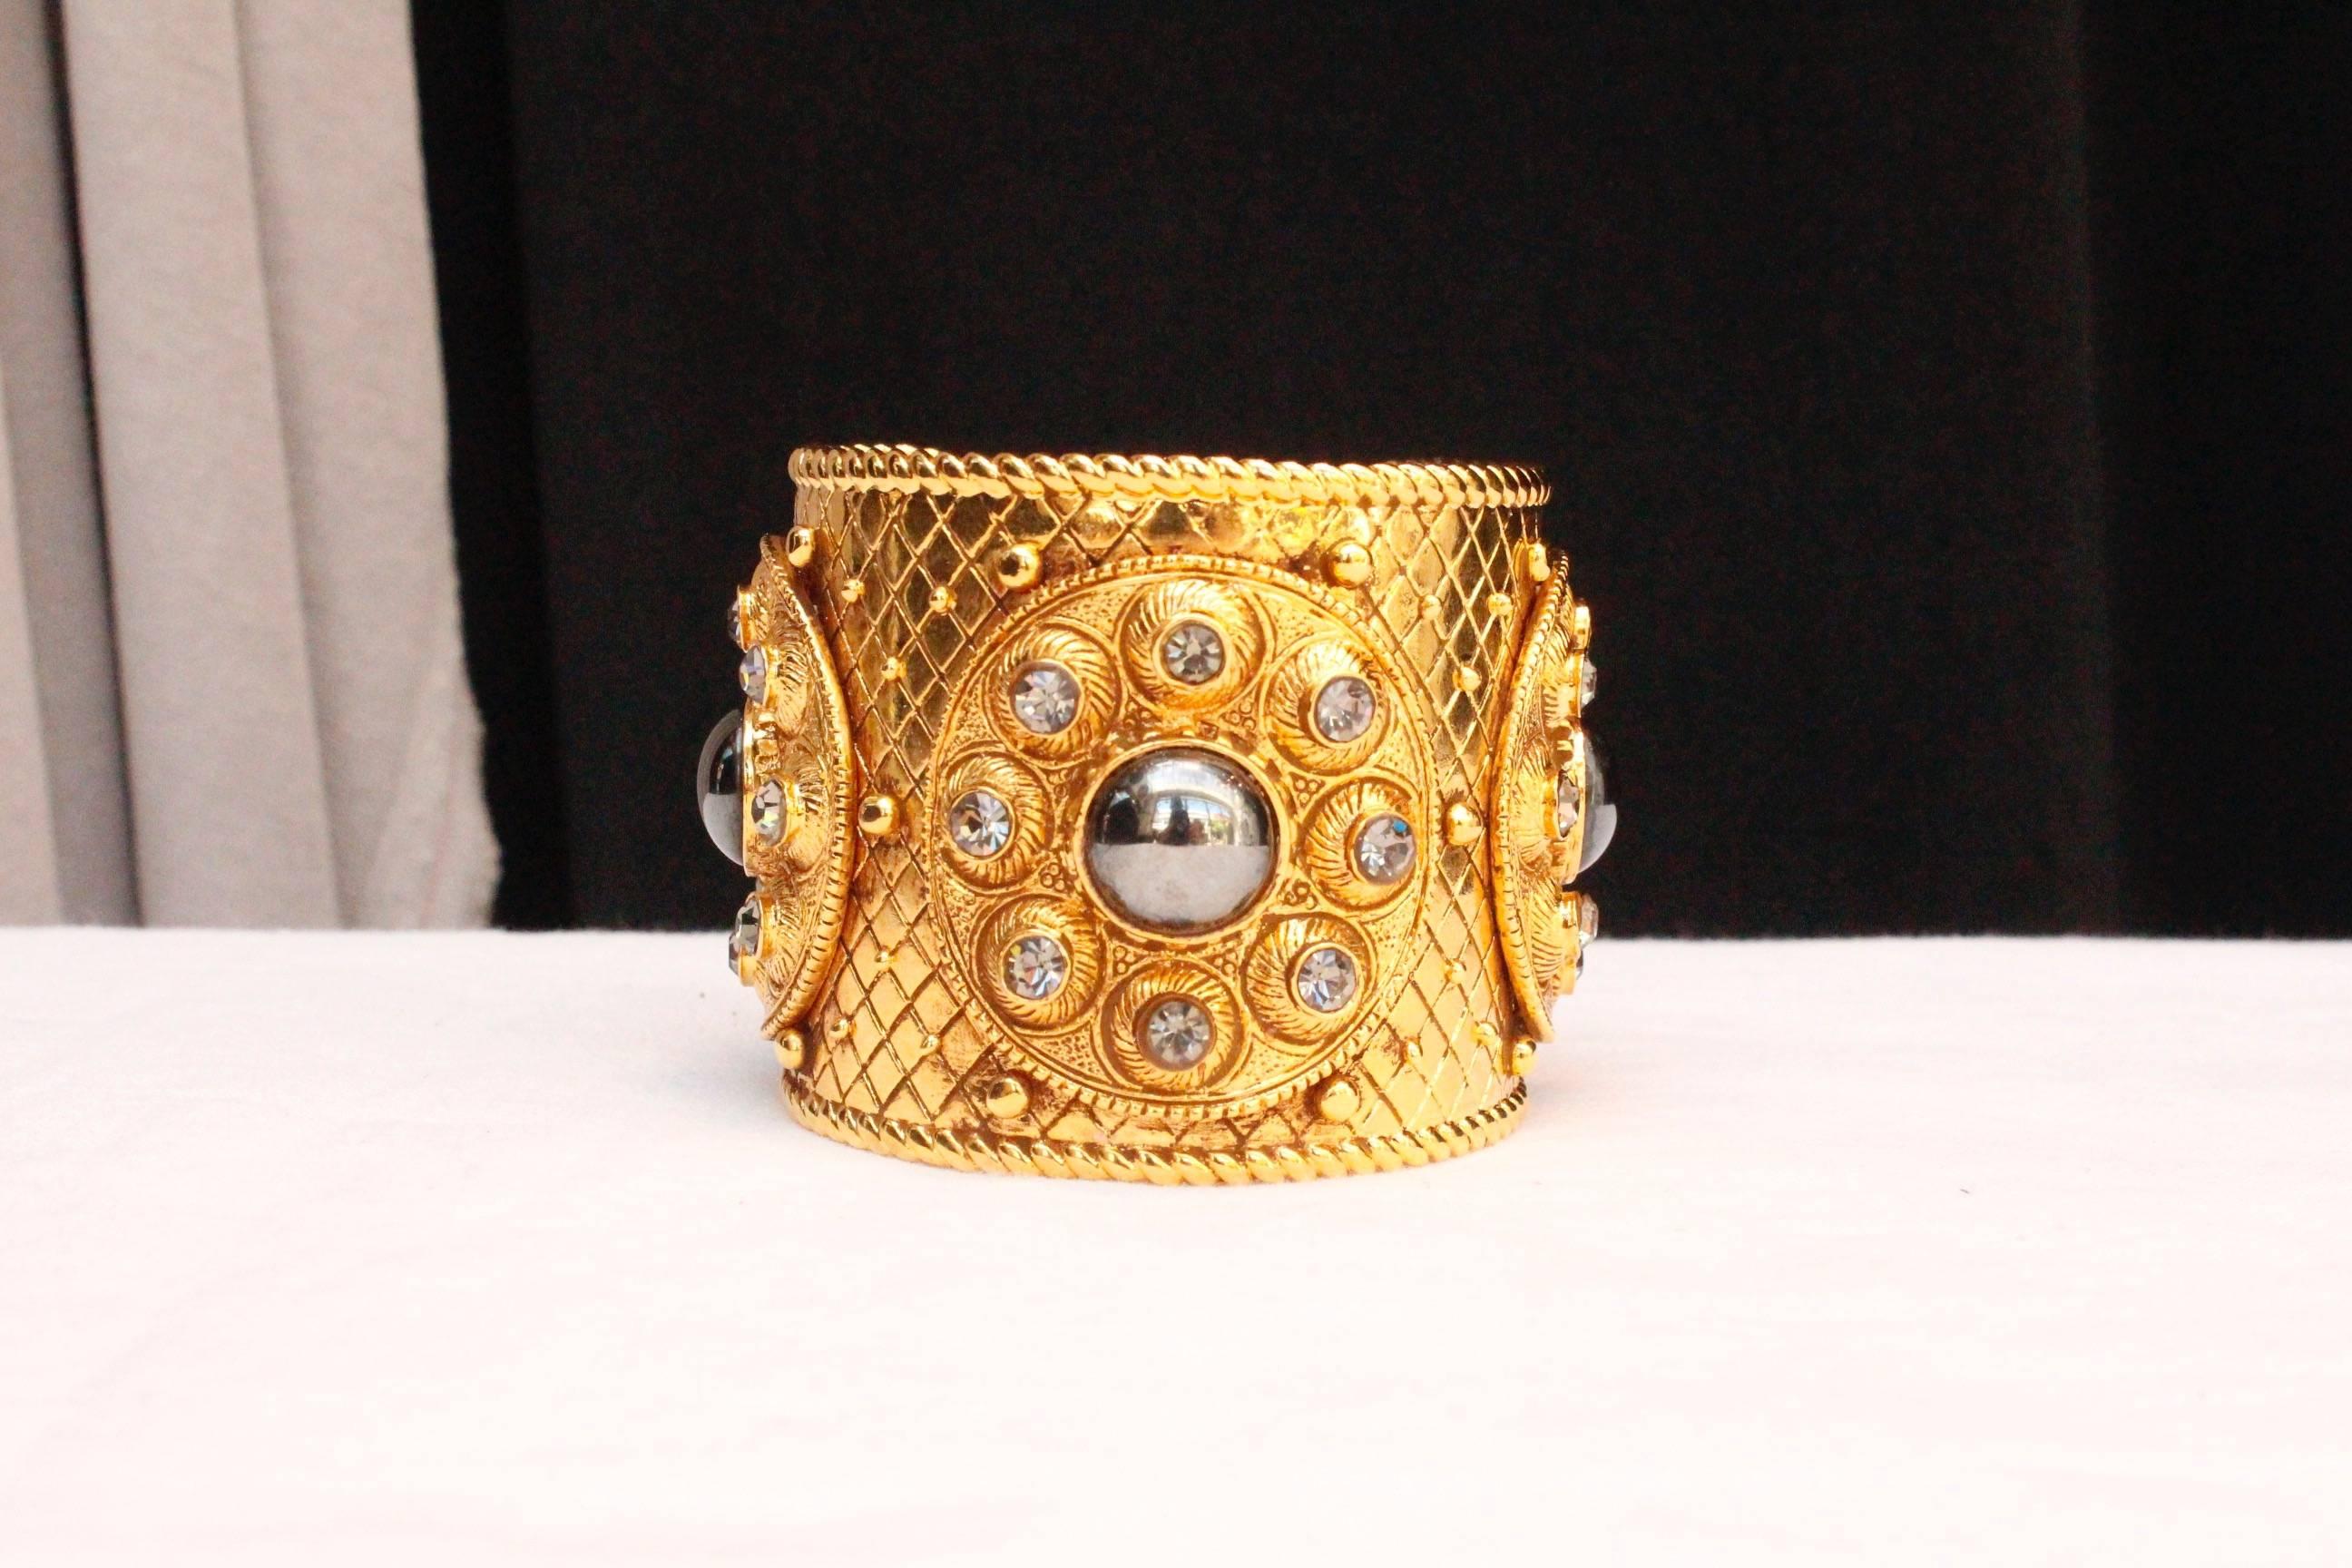 CHRISTIAN DIOR BOUTIQUE – Cuff bracelet composed of chiseled gilded metal decorated with three circles paved with rhinestones and a centered grey cabochon.  Signed inside.

Circa 1990.

Wrist circumference 17.5 cm (7 in); Opening 3 cm (1.25 in);